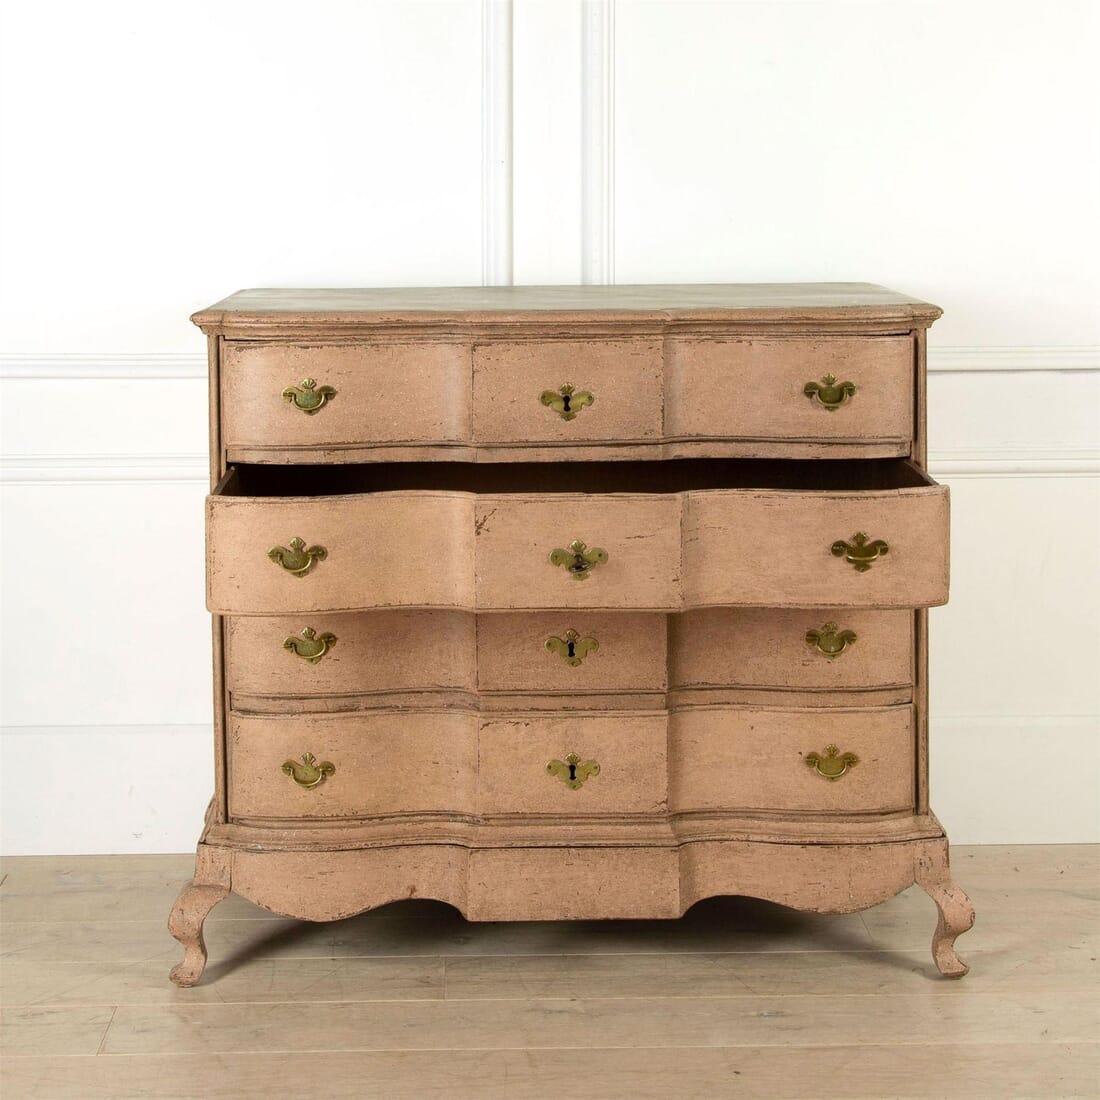 A Scandinavian three-drawer chest of drawers painted in a calming shade of Peach Blossom with unusual base, faux-marble top, dovetail joints and curved drawers. Includes the original hardware (locks, escutcheons and handles). Sweden, circa 1780.